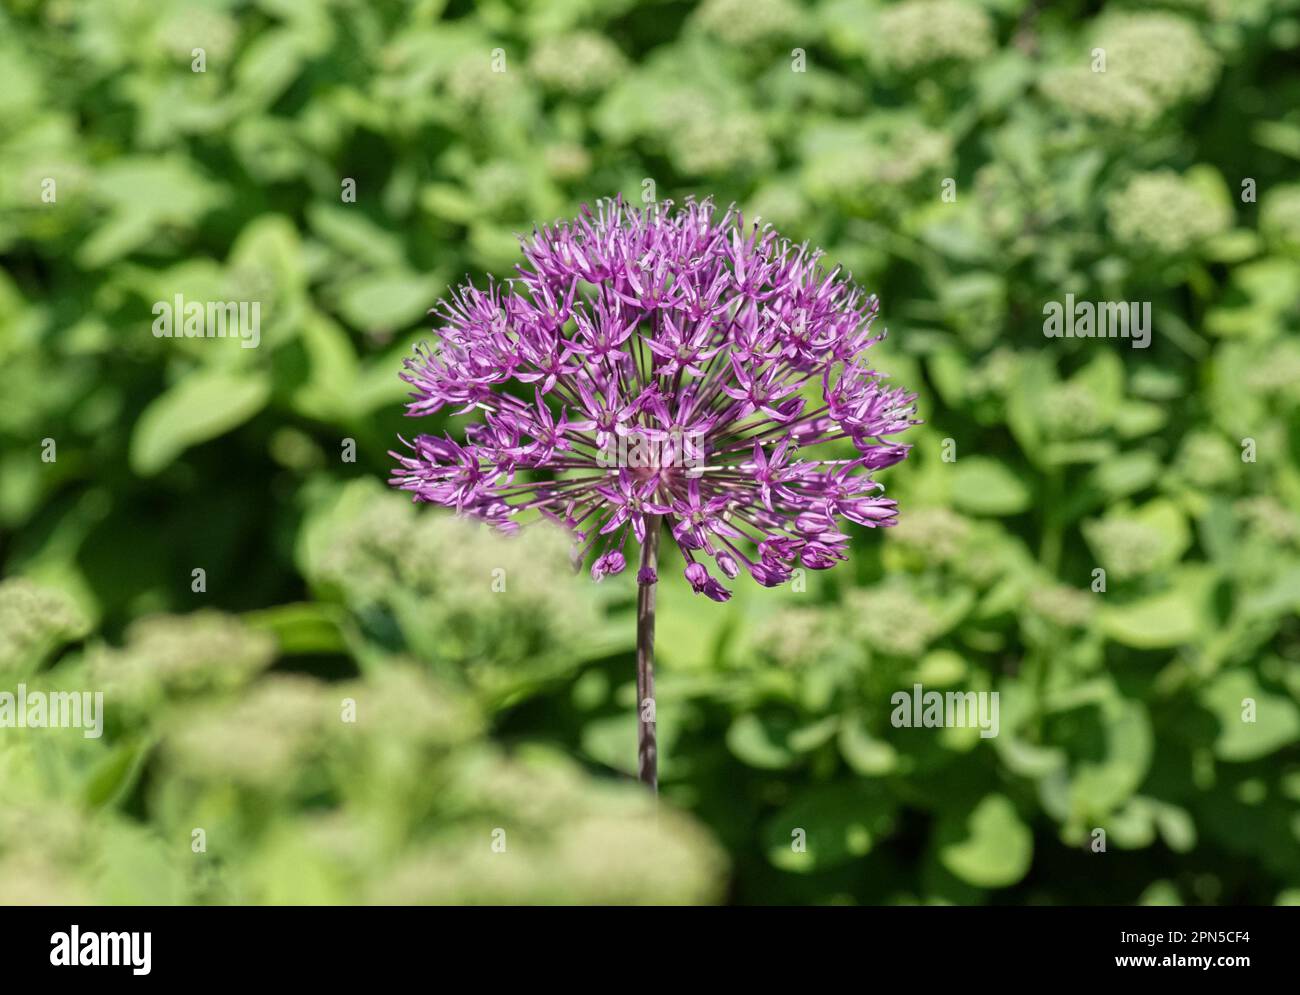 a close up of a purple flower on a plant Stock Photo